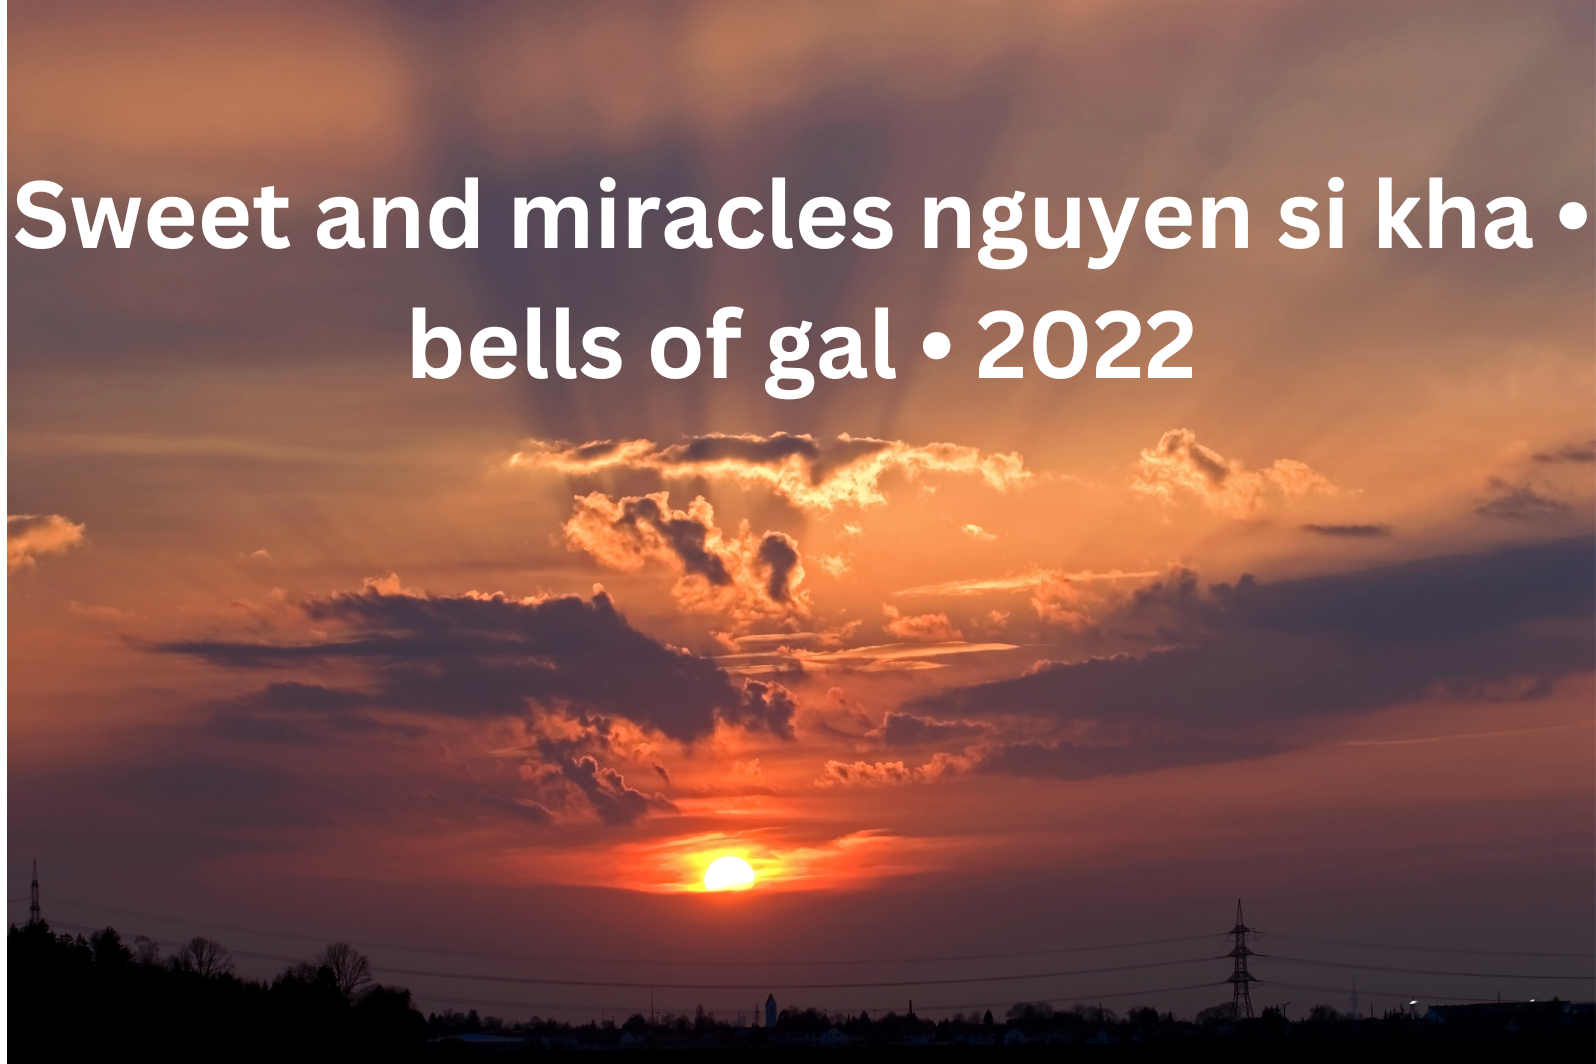 sweet and miracles nguyen si kha • bells of gal • 2022